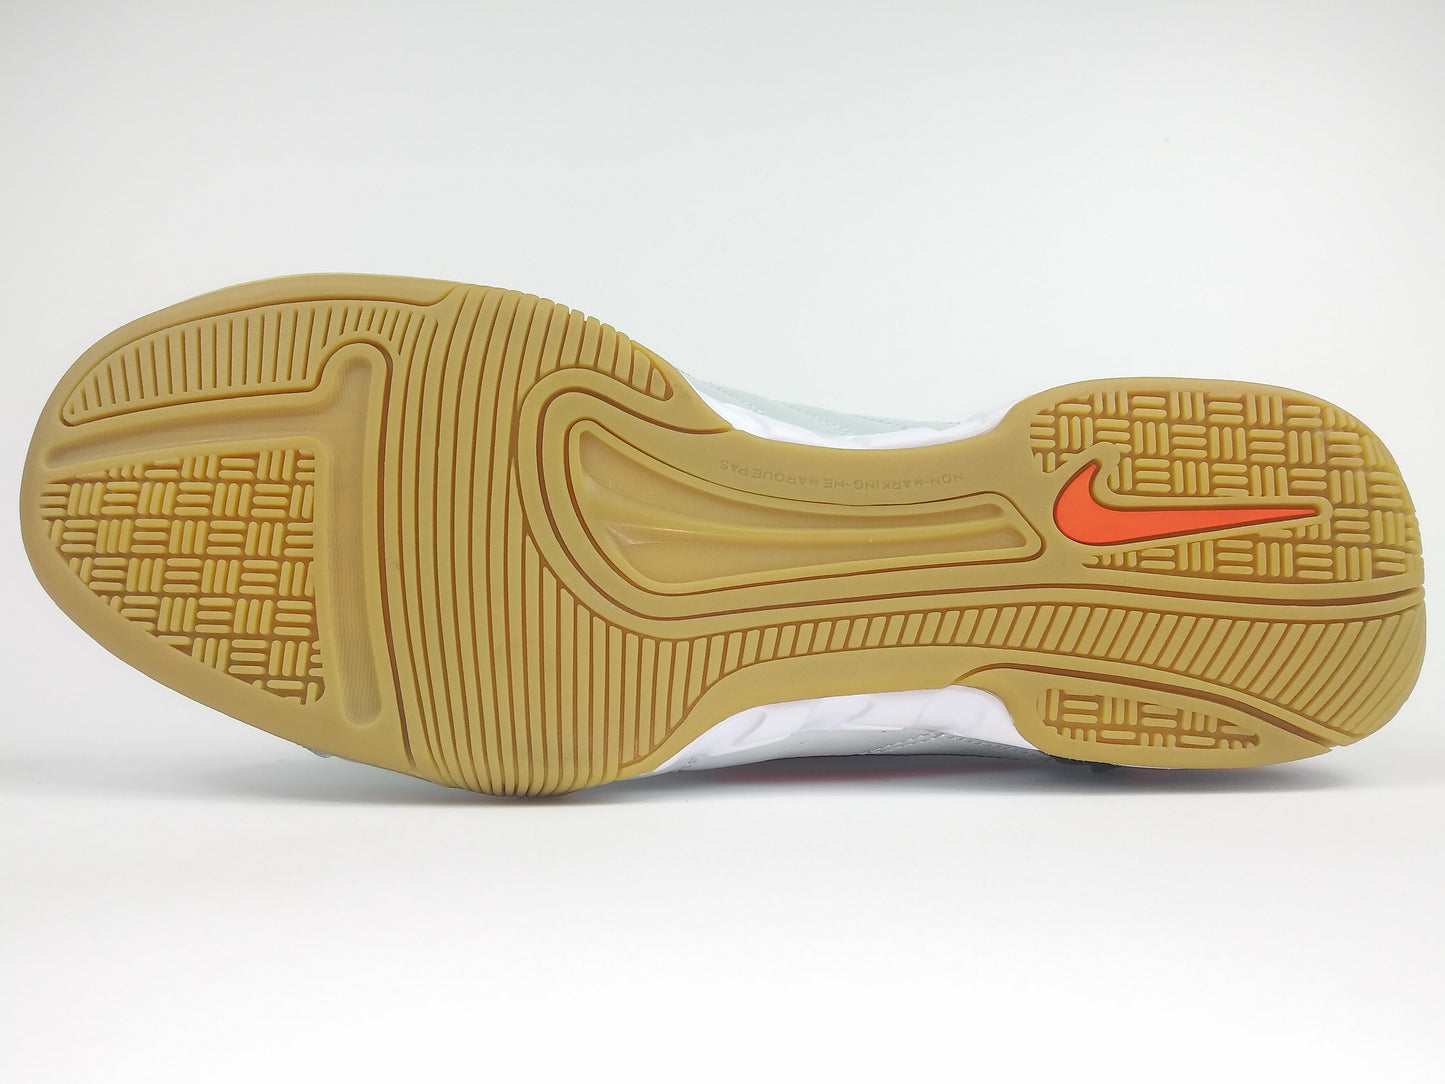 Nike Total90 Shoot lll IC Indoor Shoes White Orange